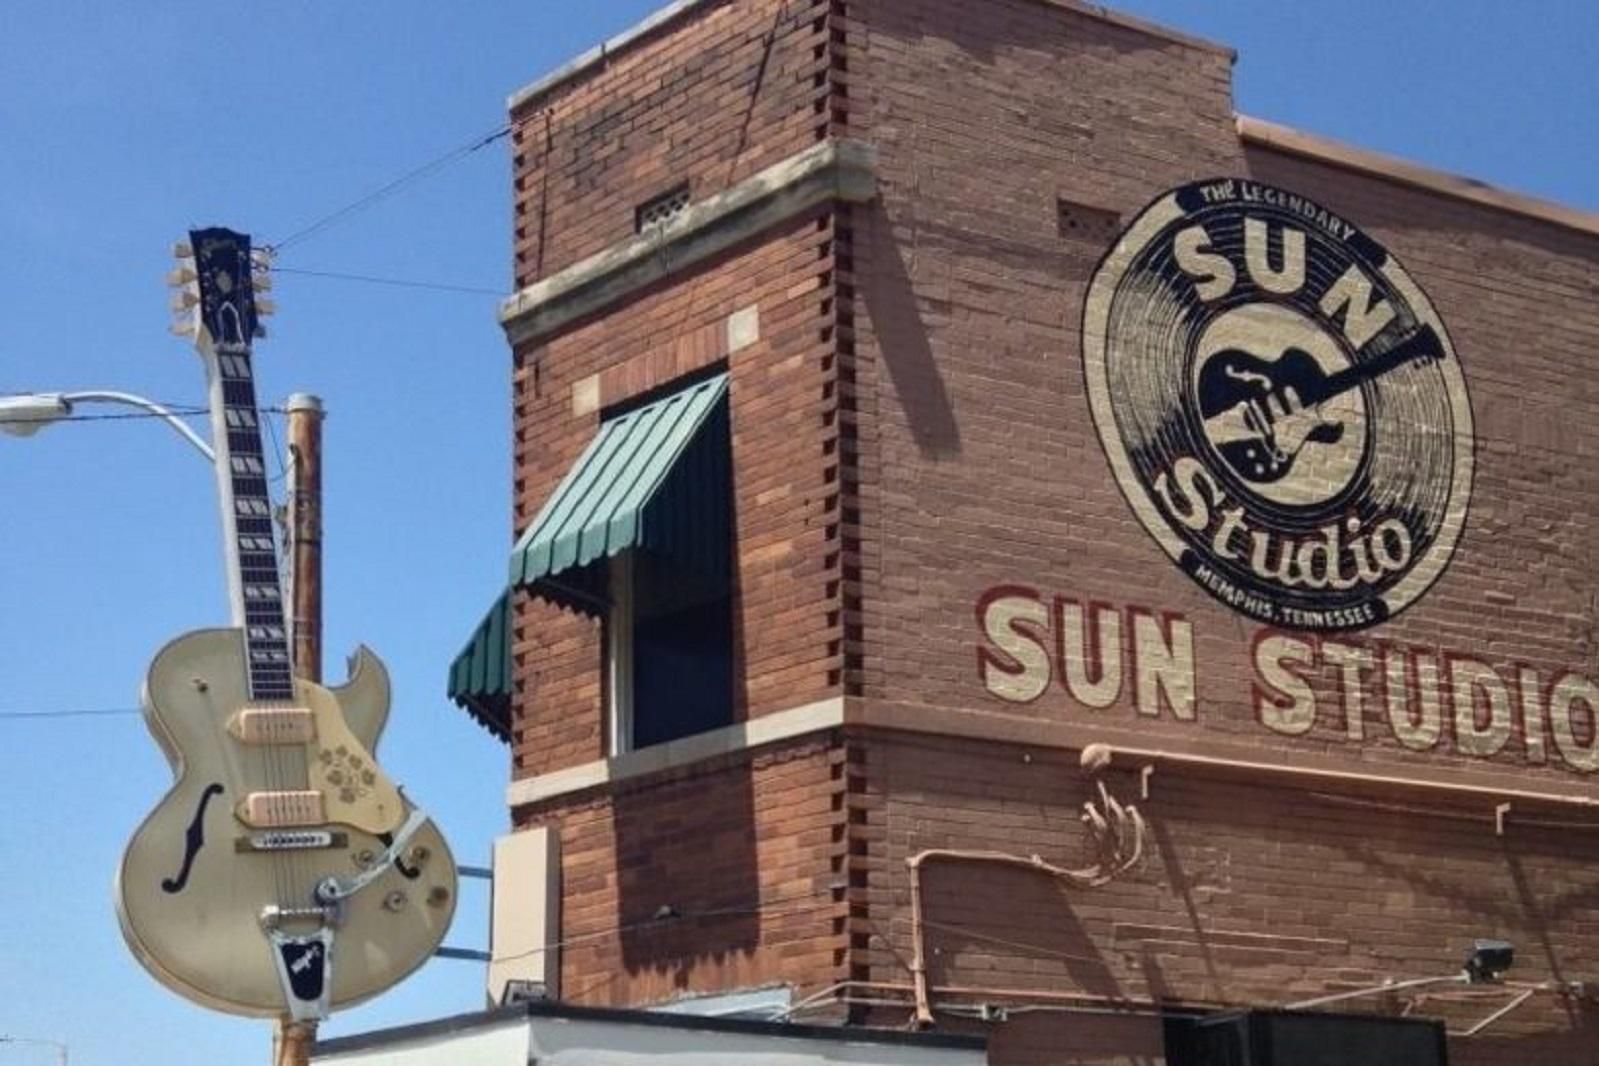 Take our free shuttle to Sun Studios, just 1.5 MI from the hotel